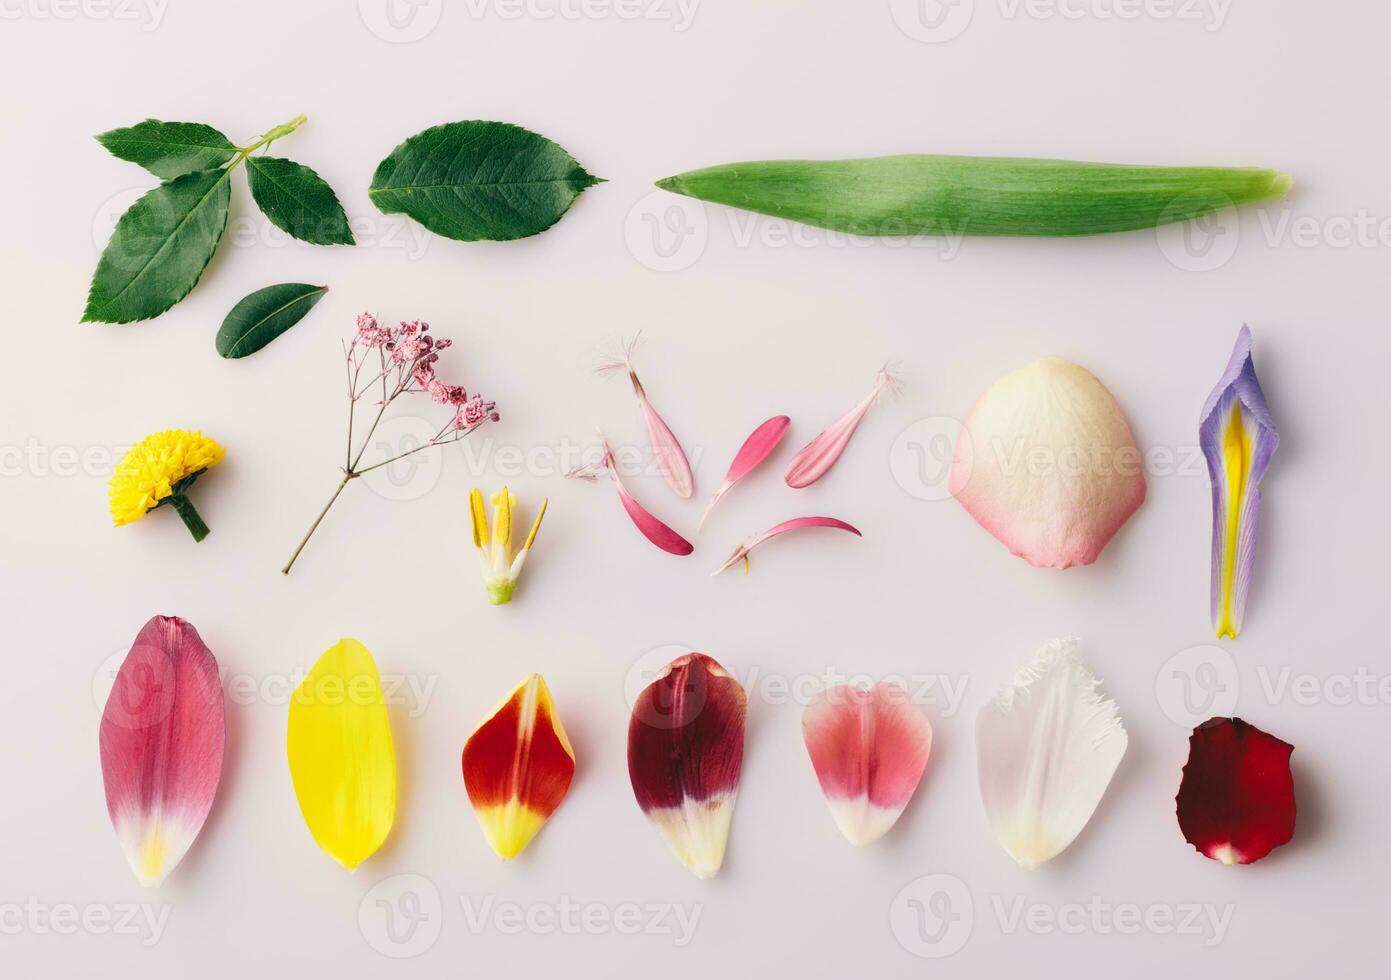 Parts of flower - petals and leaves floral collection. View from above, flat lay photo